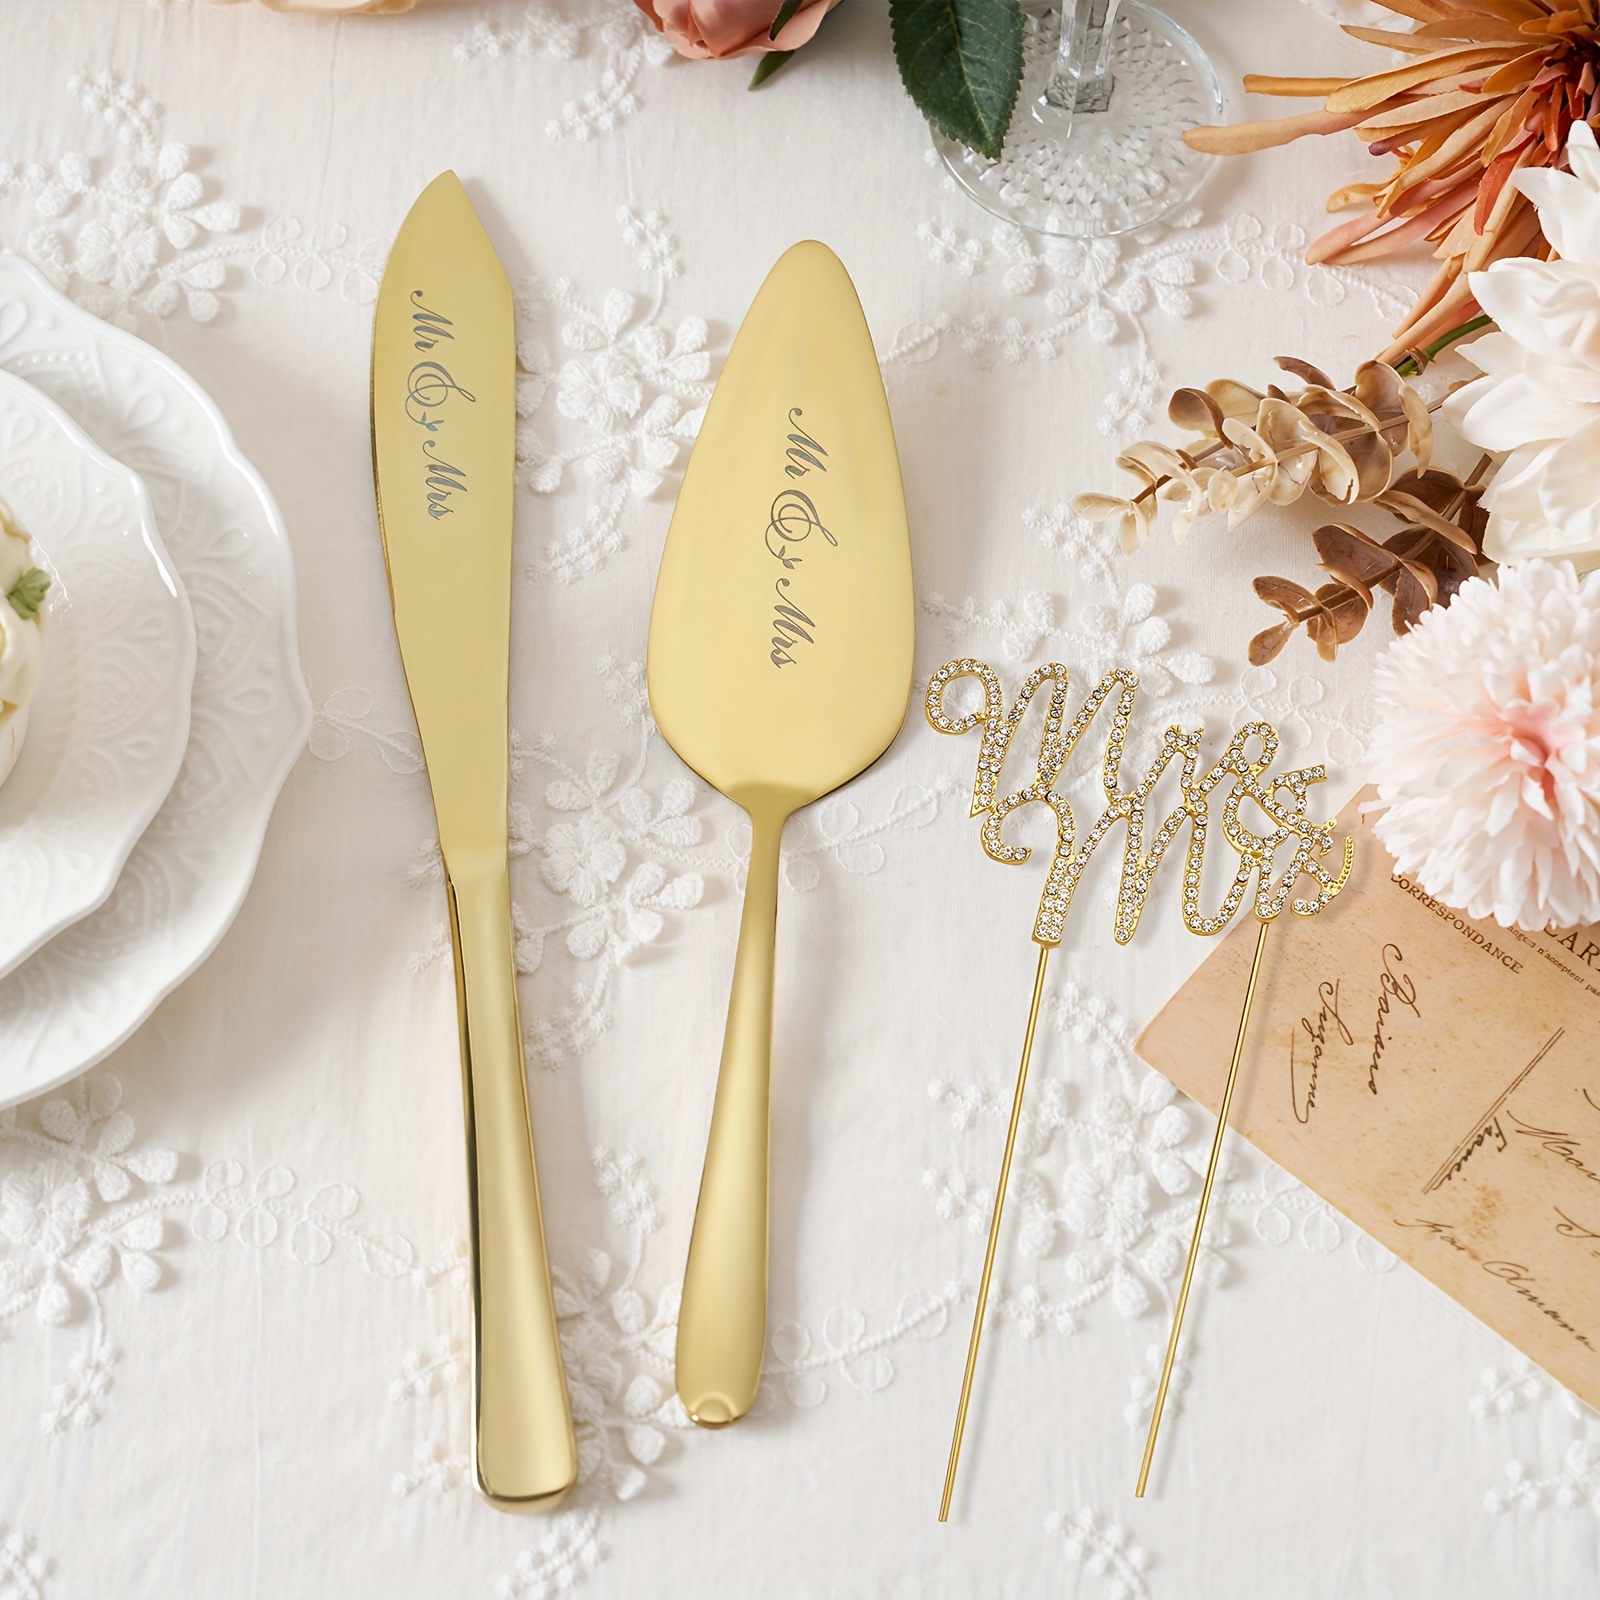 

Wedding Cake Knife And Server Set With Cake Toppers, Mr And Mrs Cake Toppers Bride And Groom Anniversary Engagement Wedding Gifts For Couples